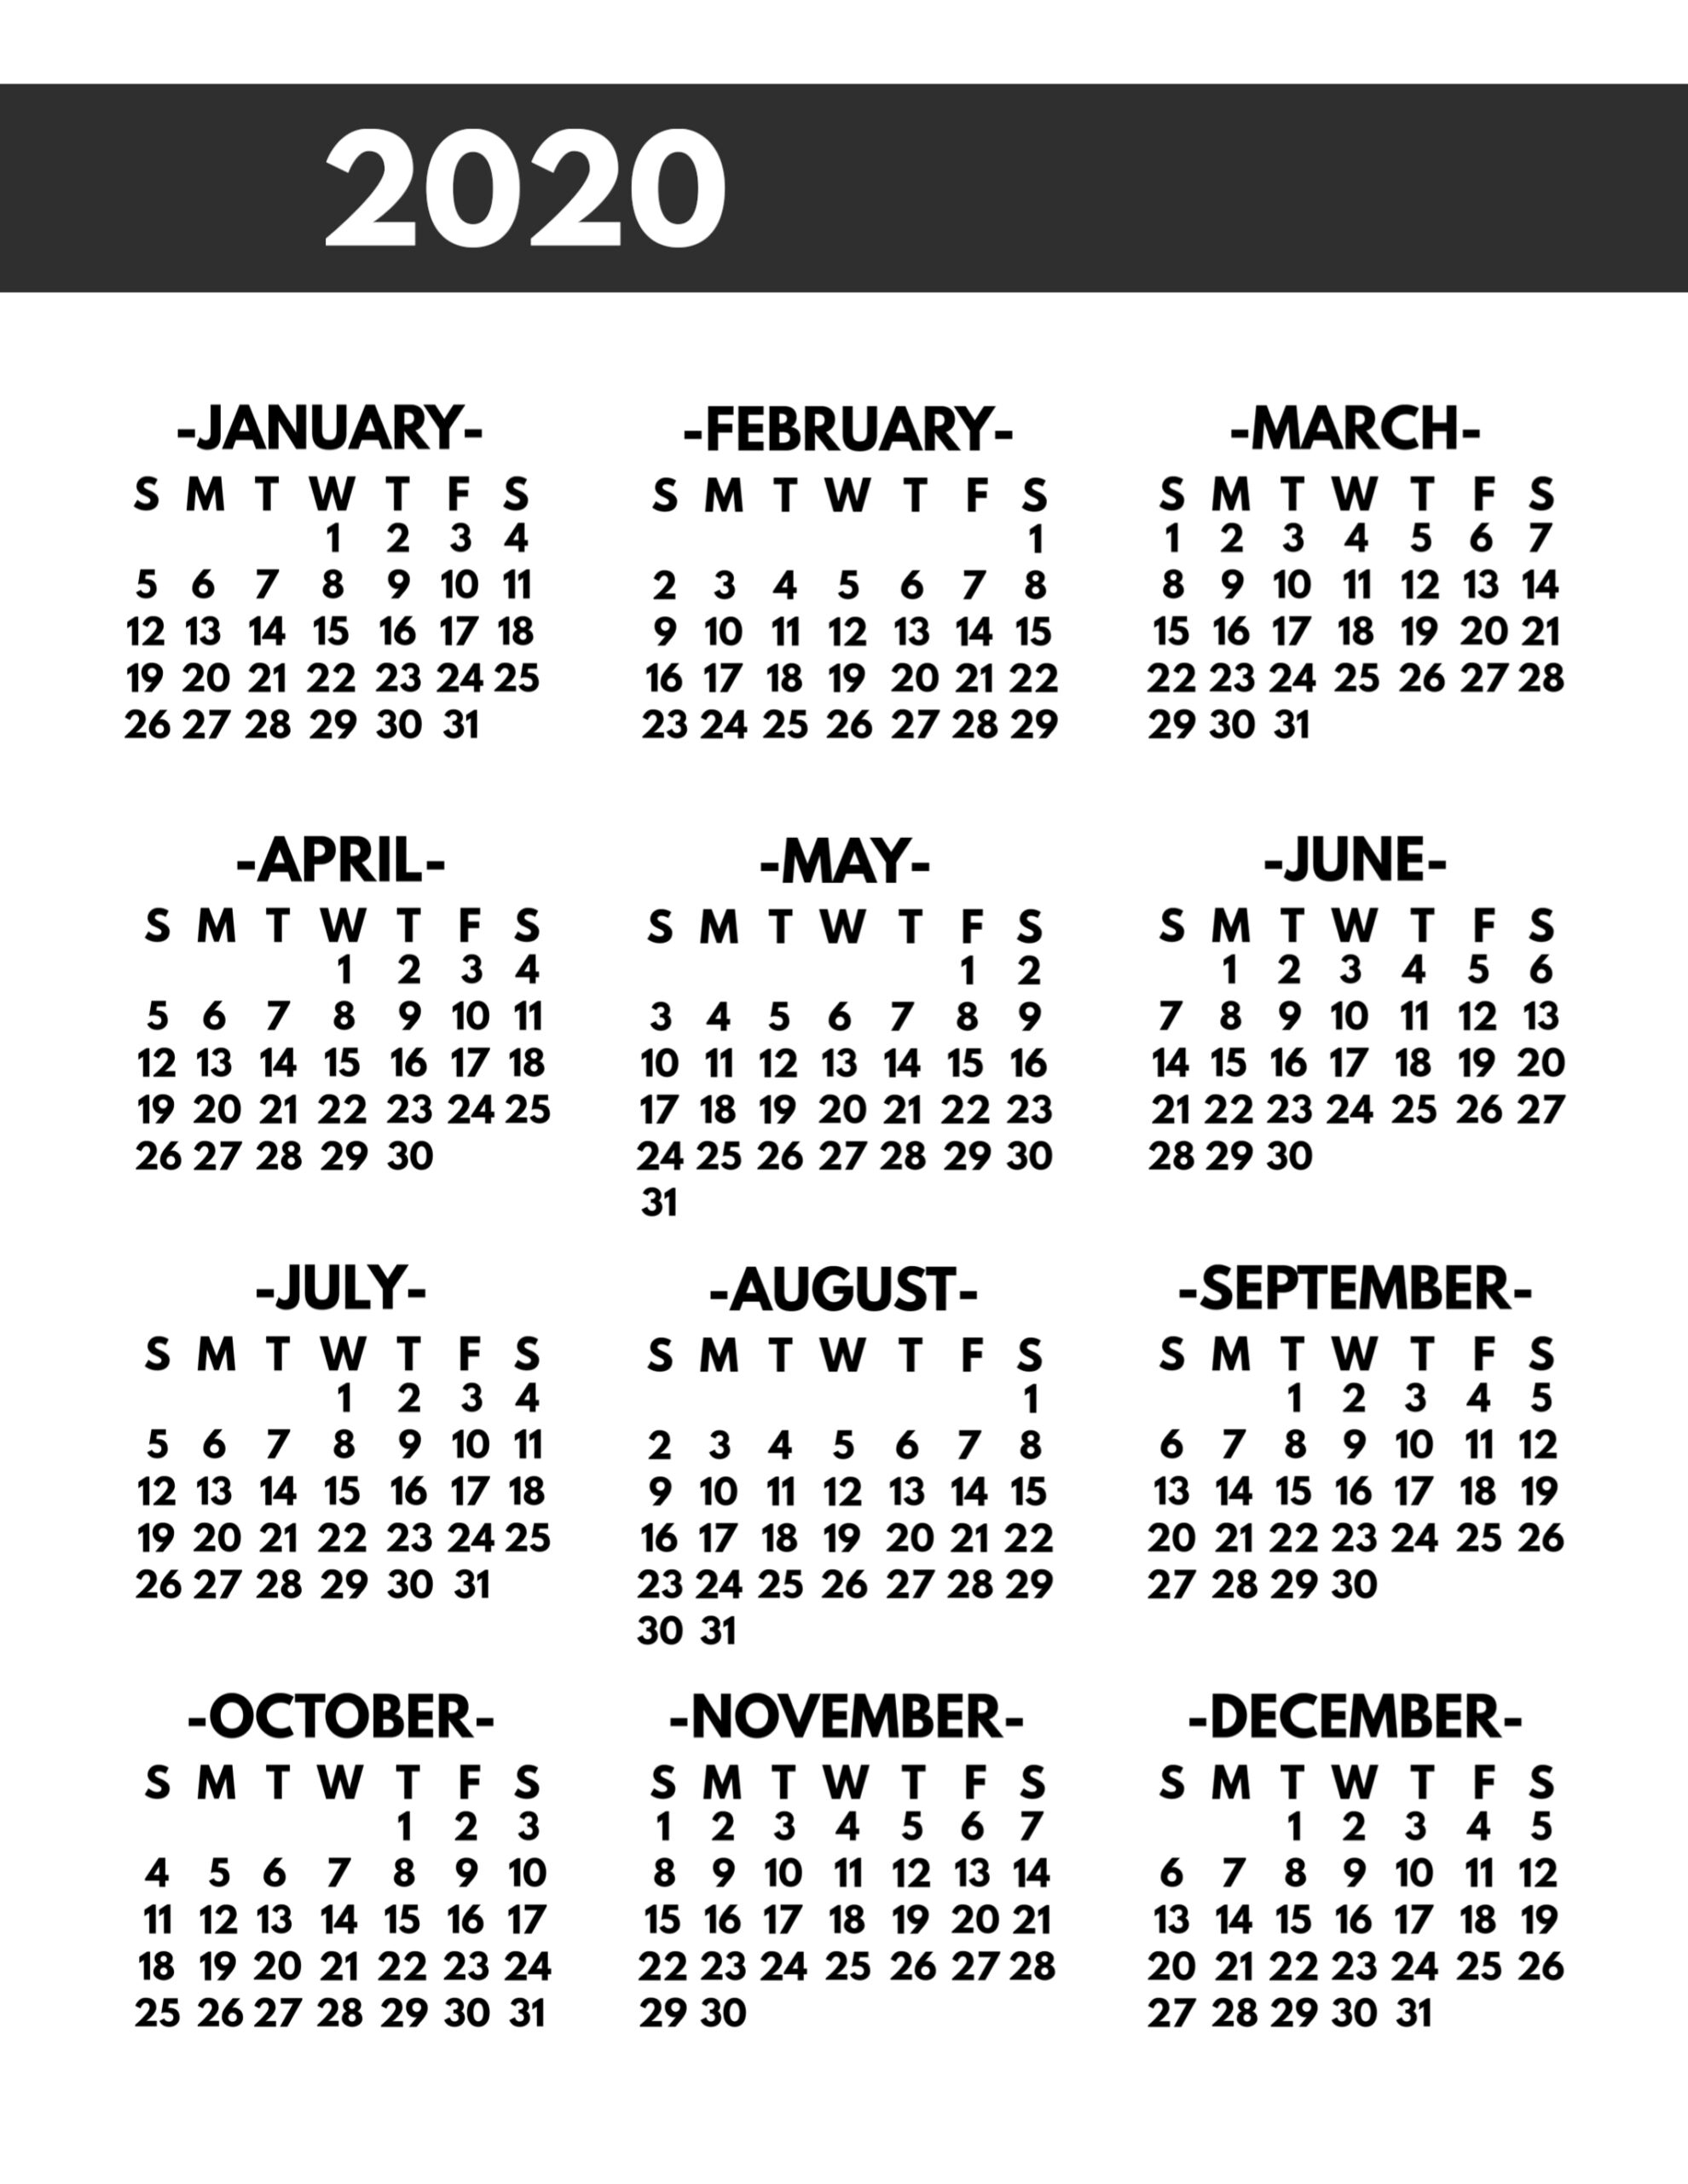 2020 Printable One Page Year At A Glance Calendar - Paper inside 2020 Free Printable Calendars Without Downloading At A Glance